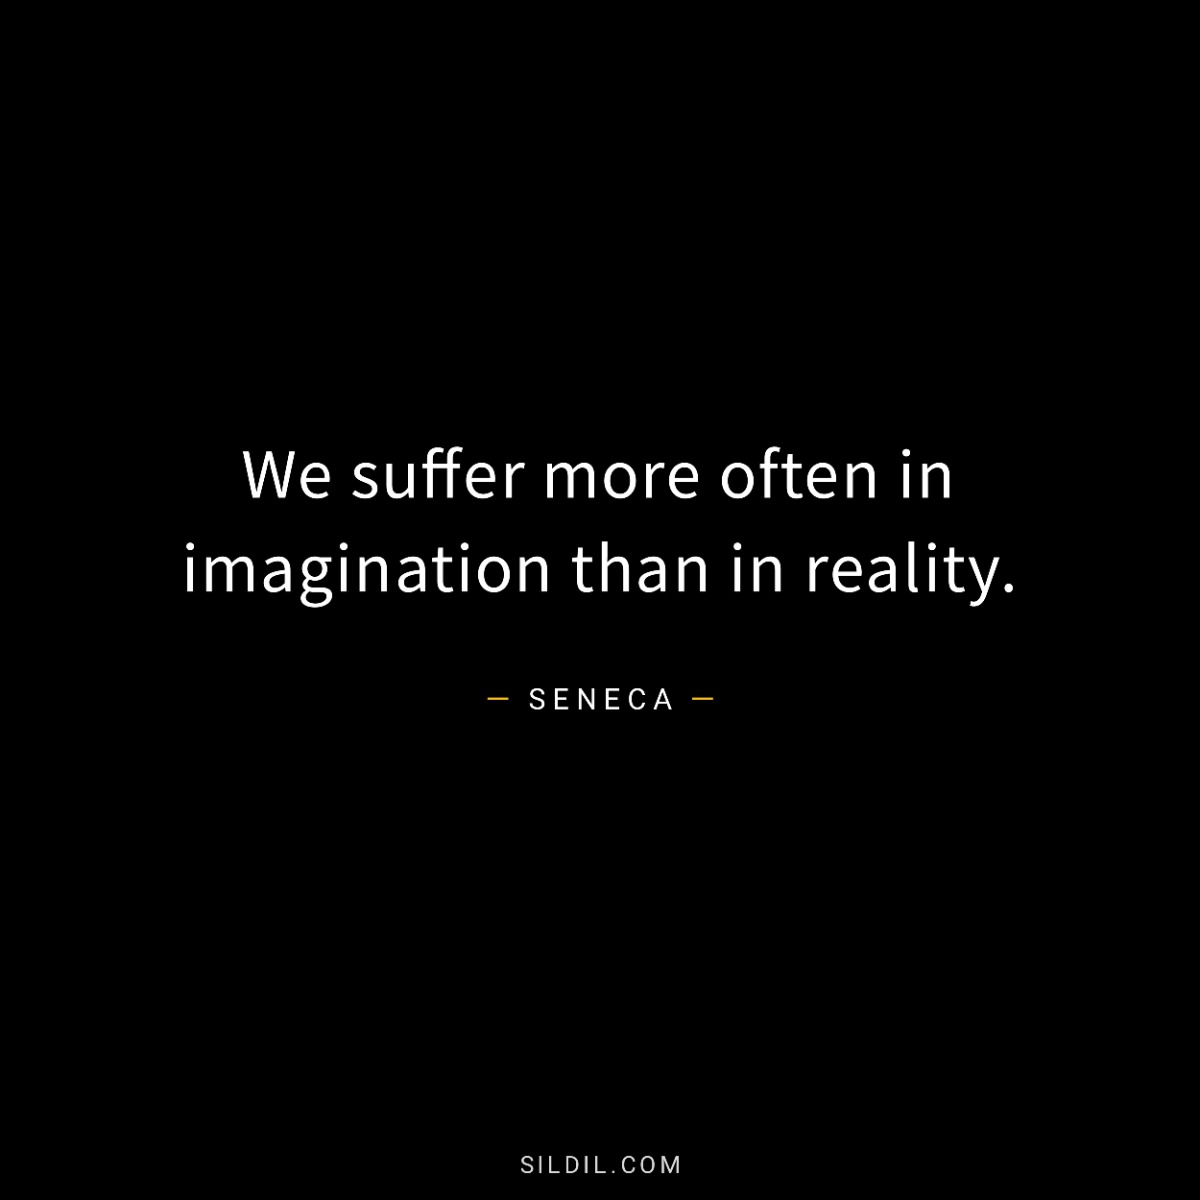 We suffer more often in imagination than in reality.